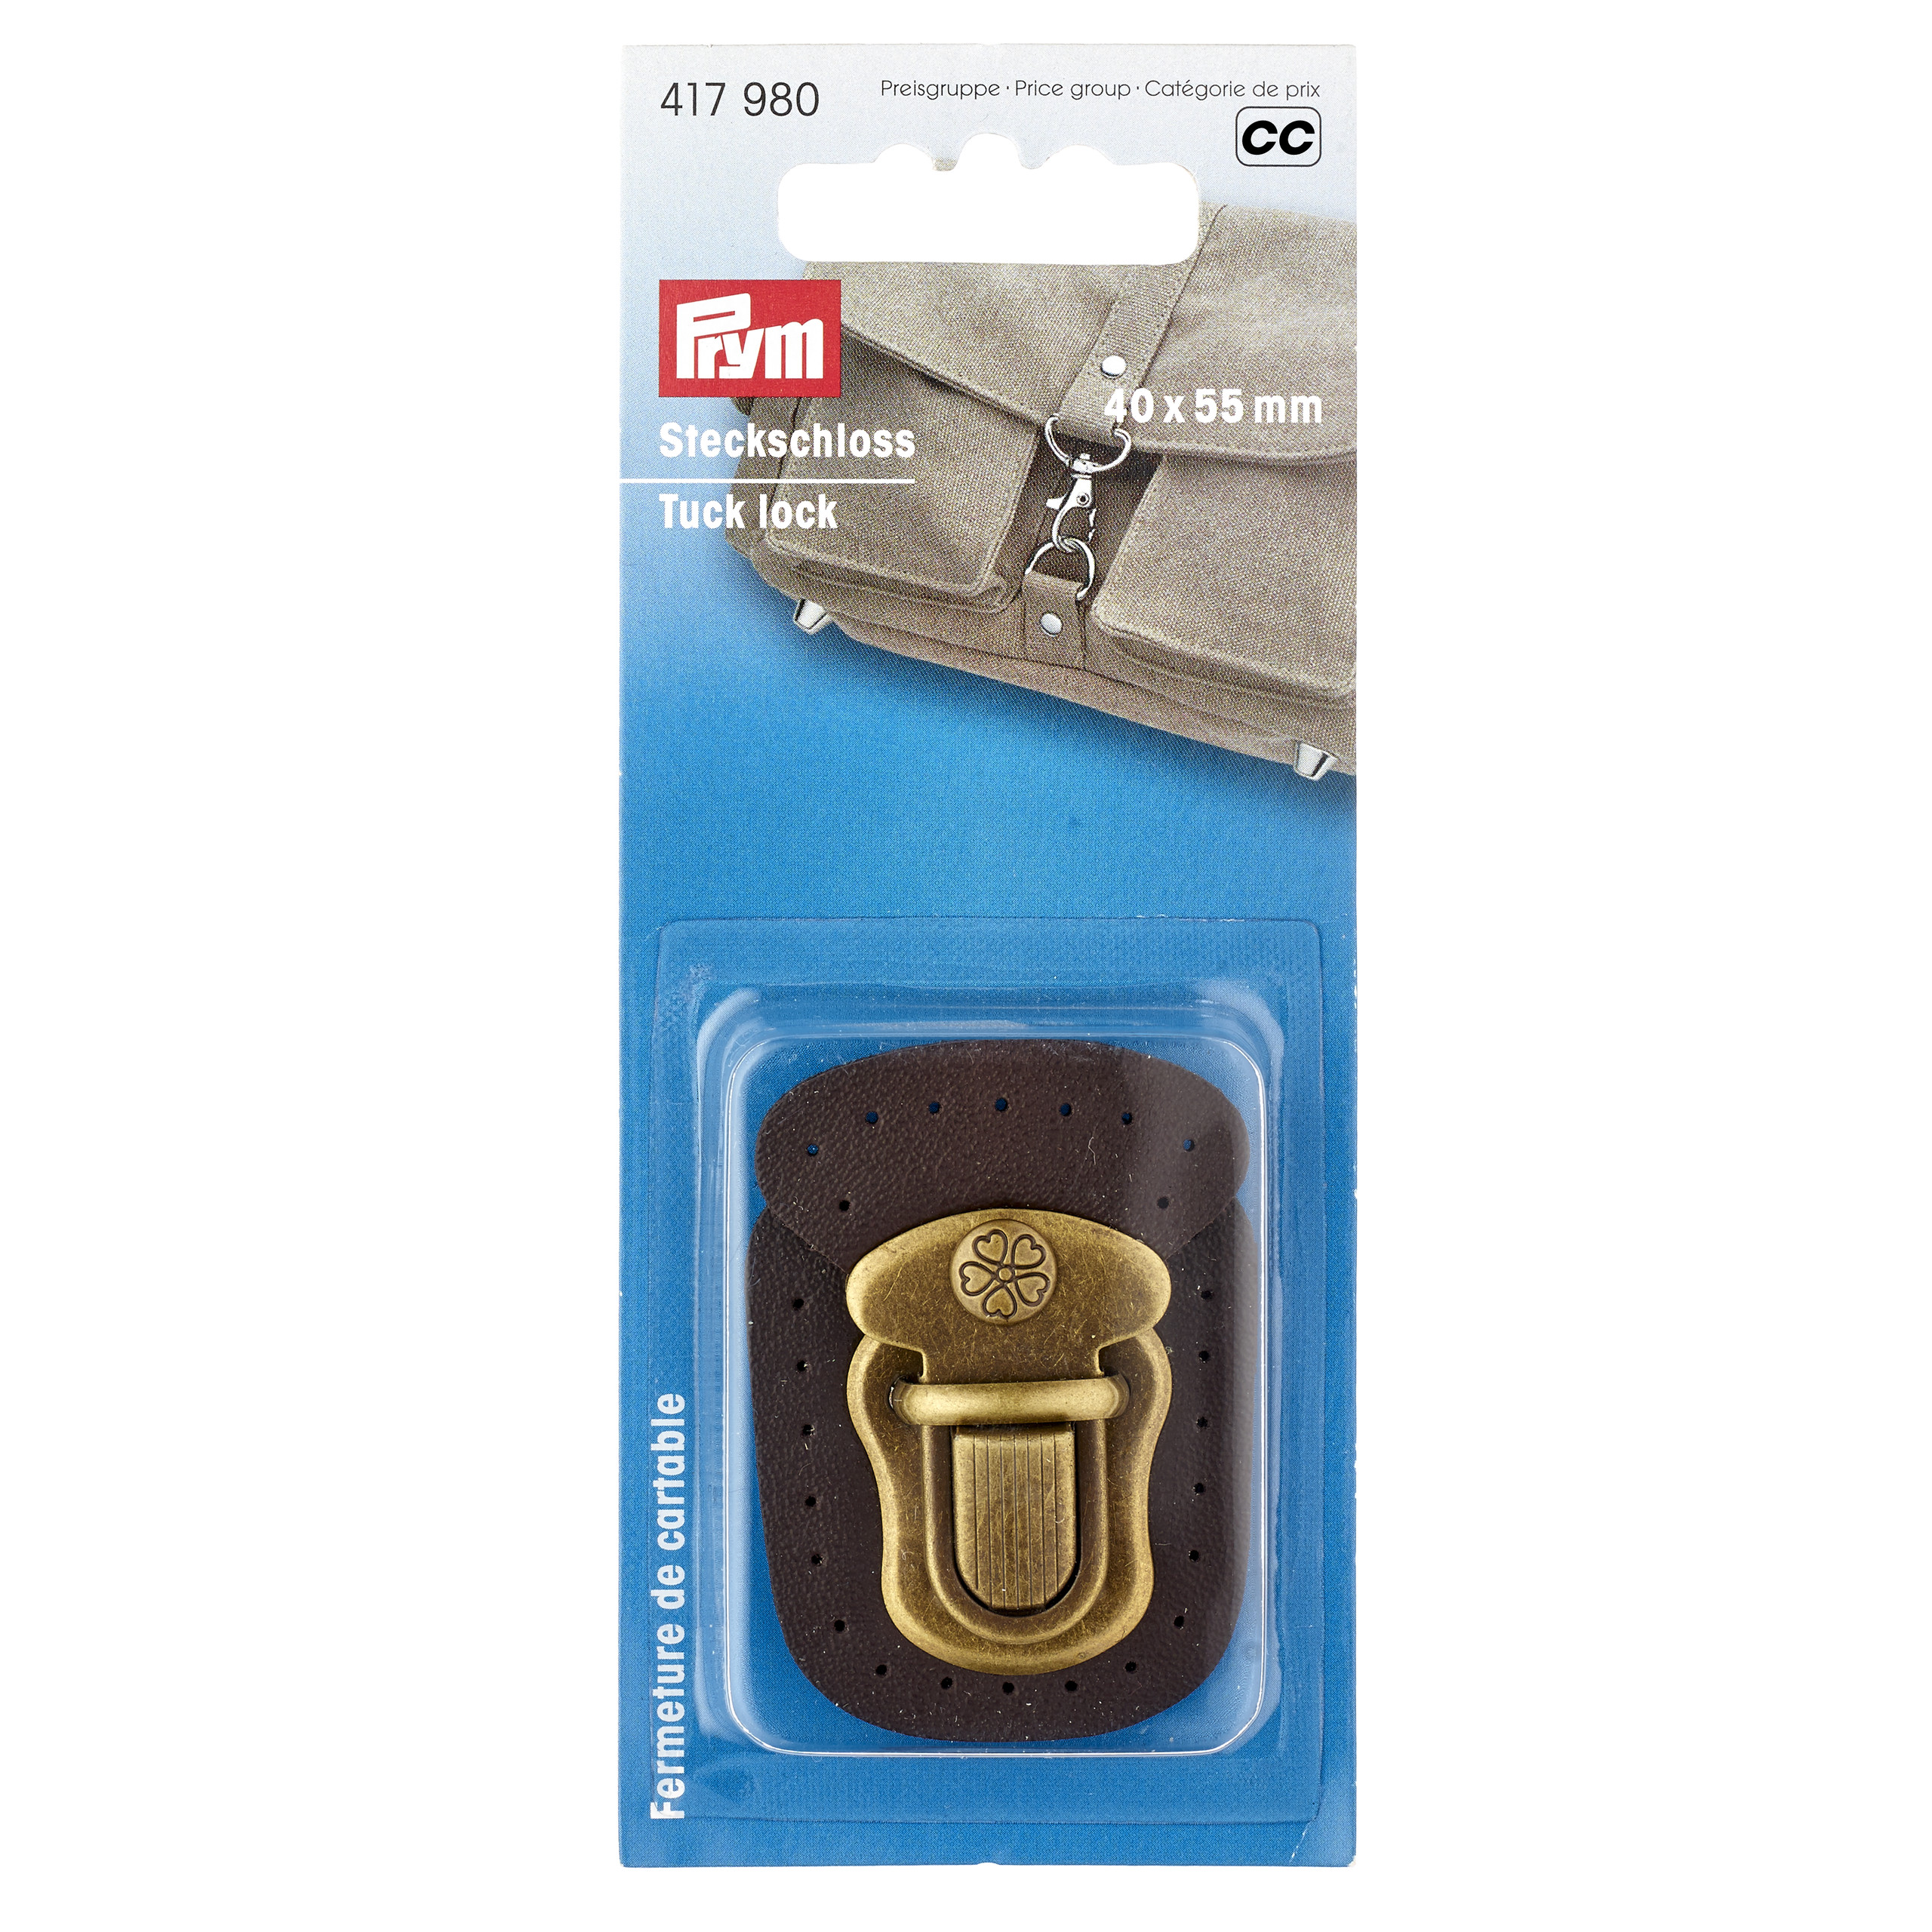 Tuck lock for sewing on brown, 1 St